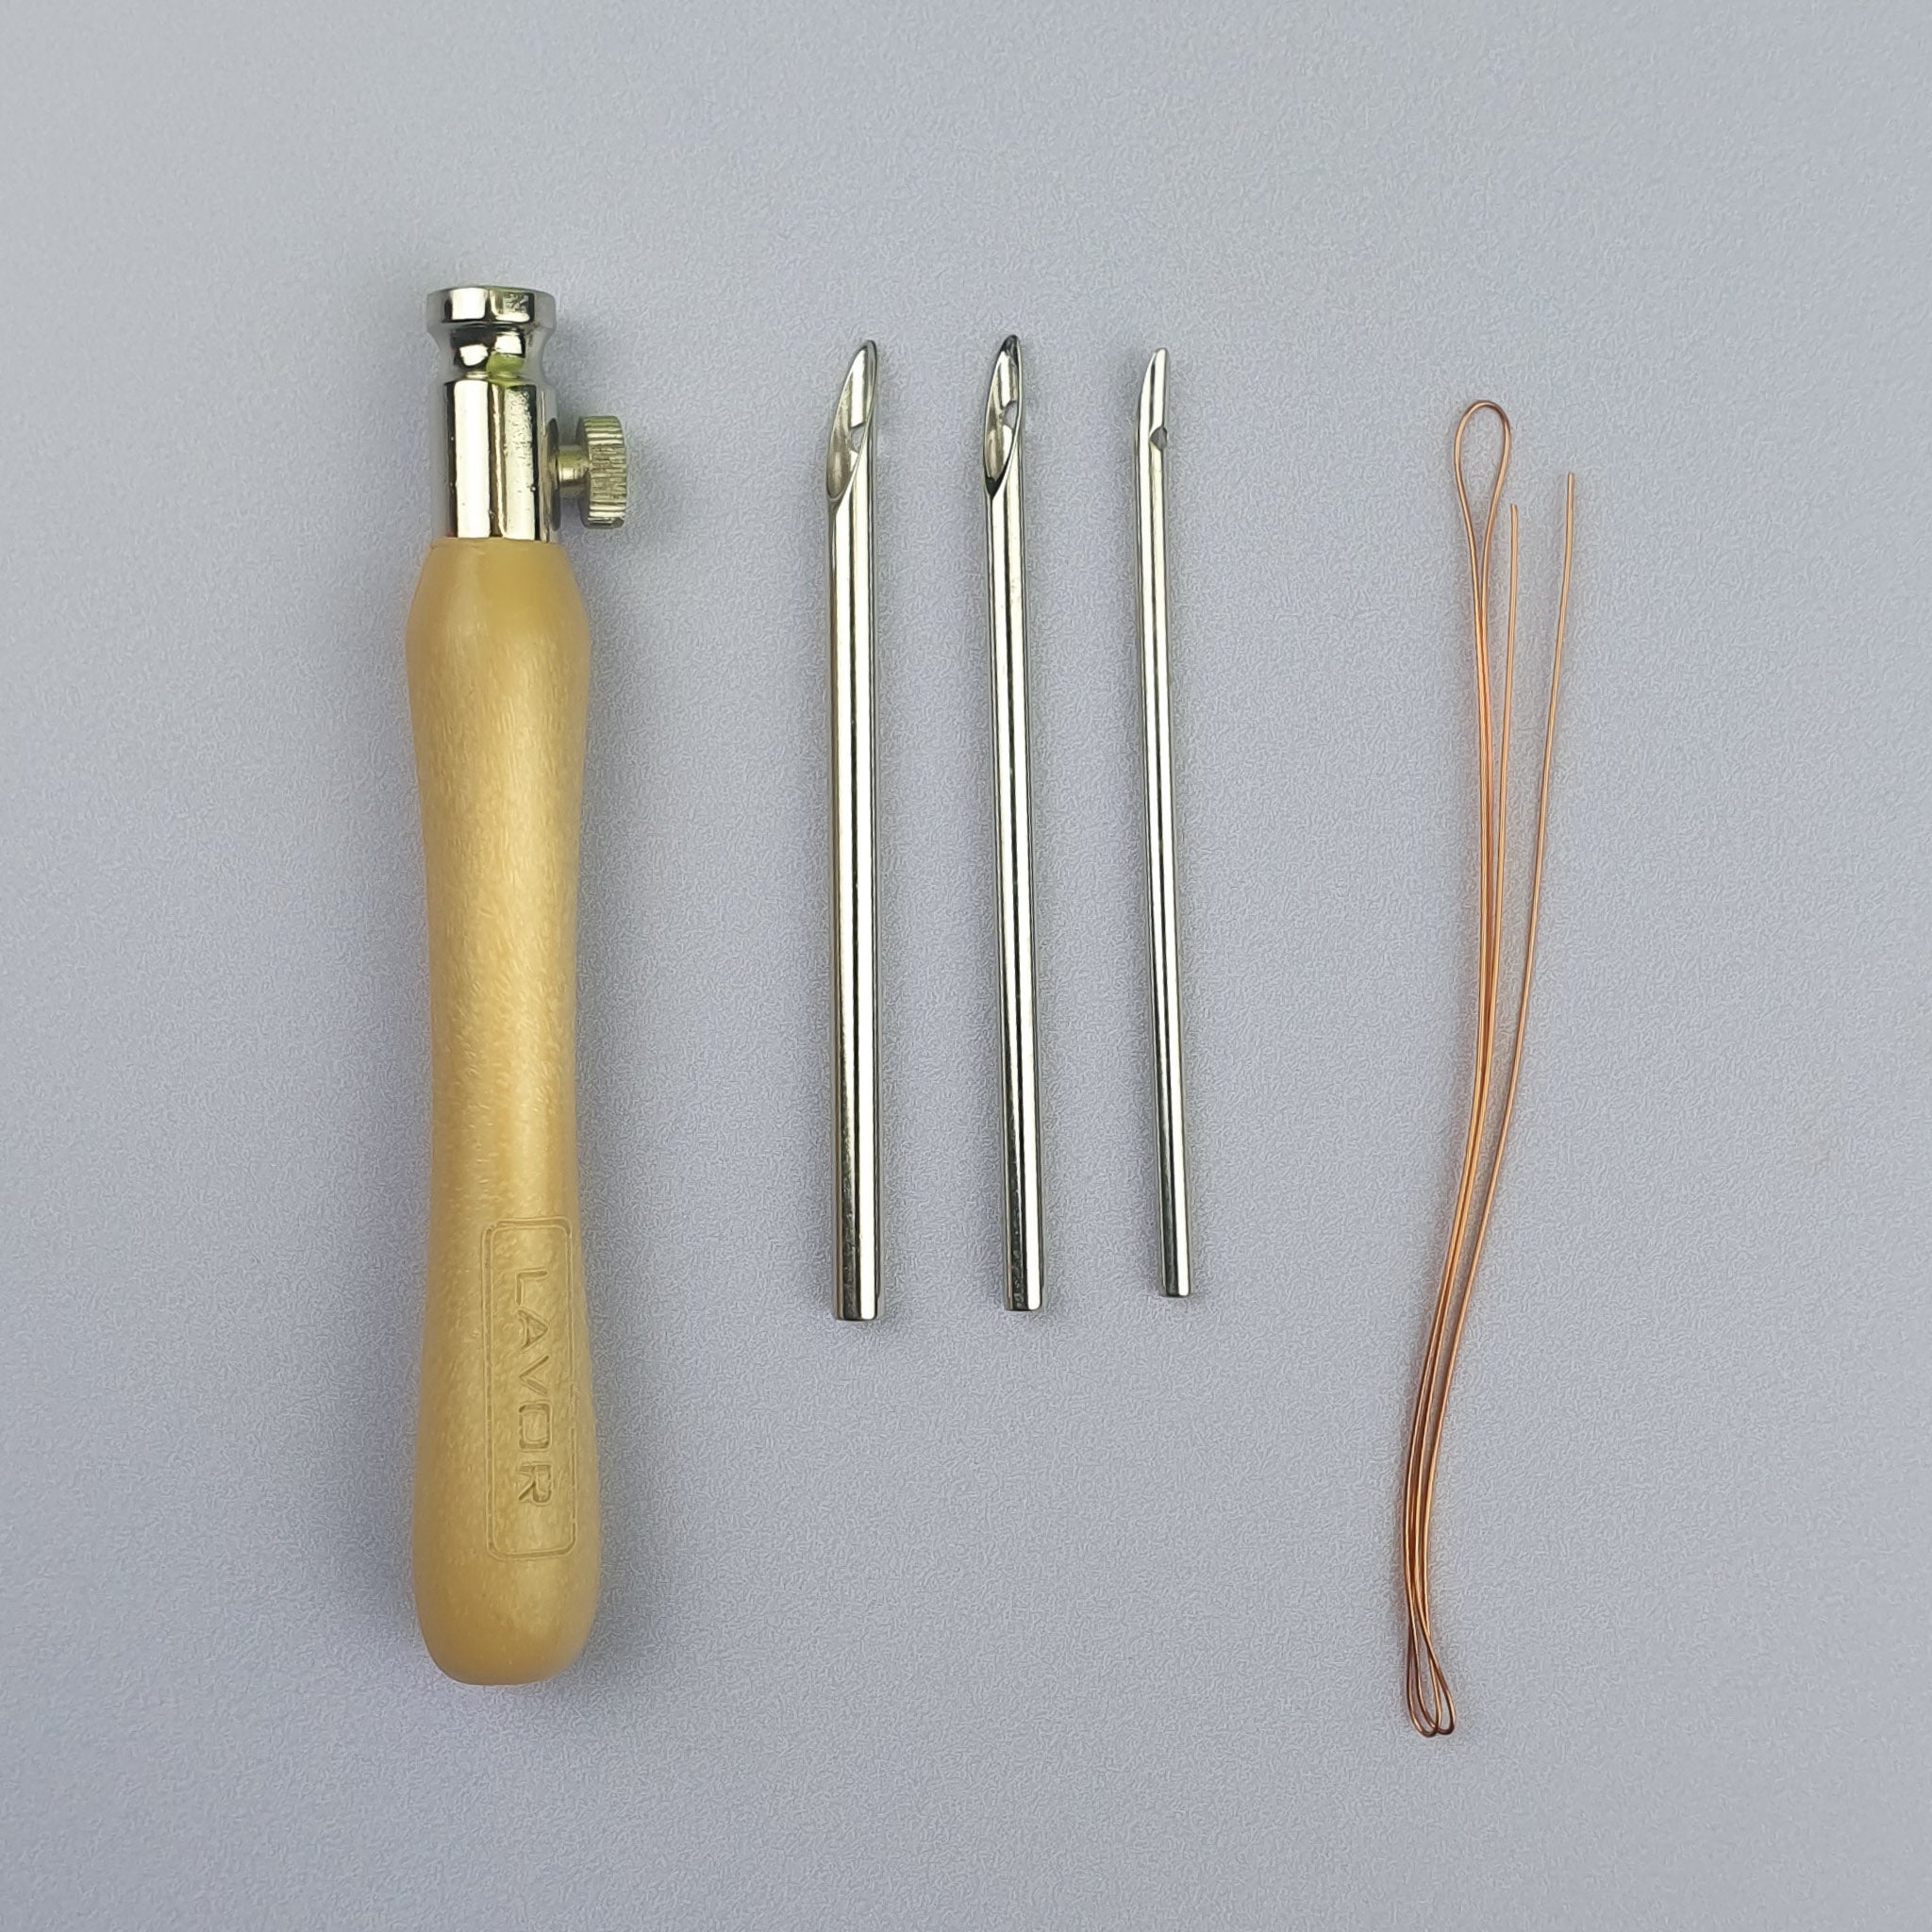 Lavor Fine Punch Needle Set 3 Needles Threader and Punch